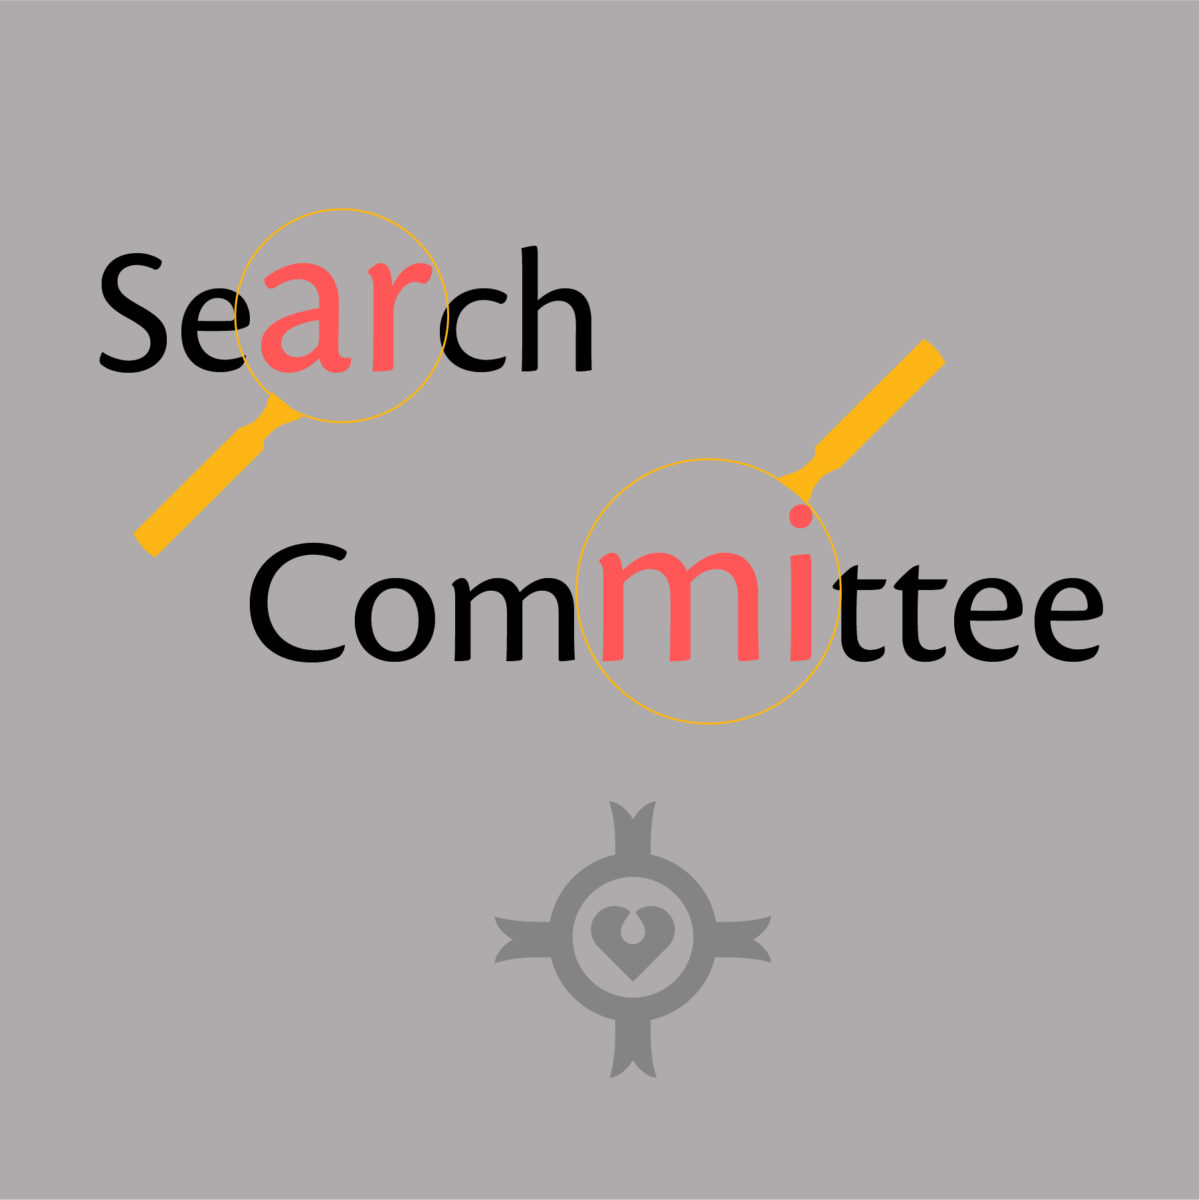 Commissioning of the Search Committe